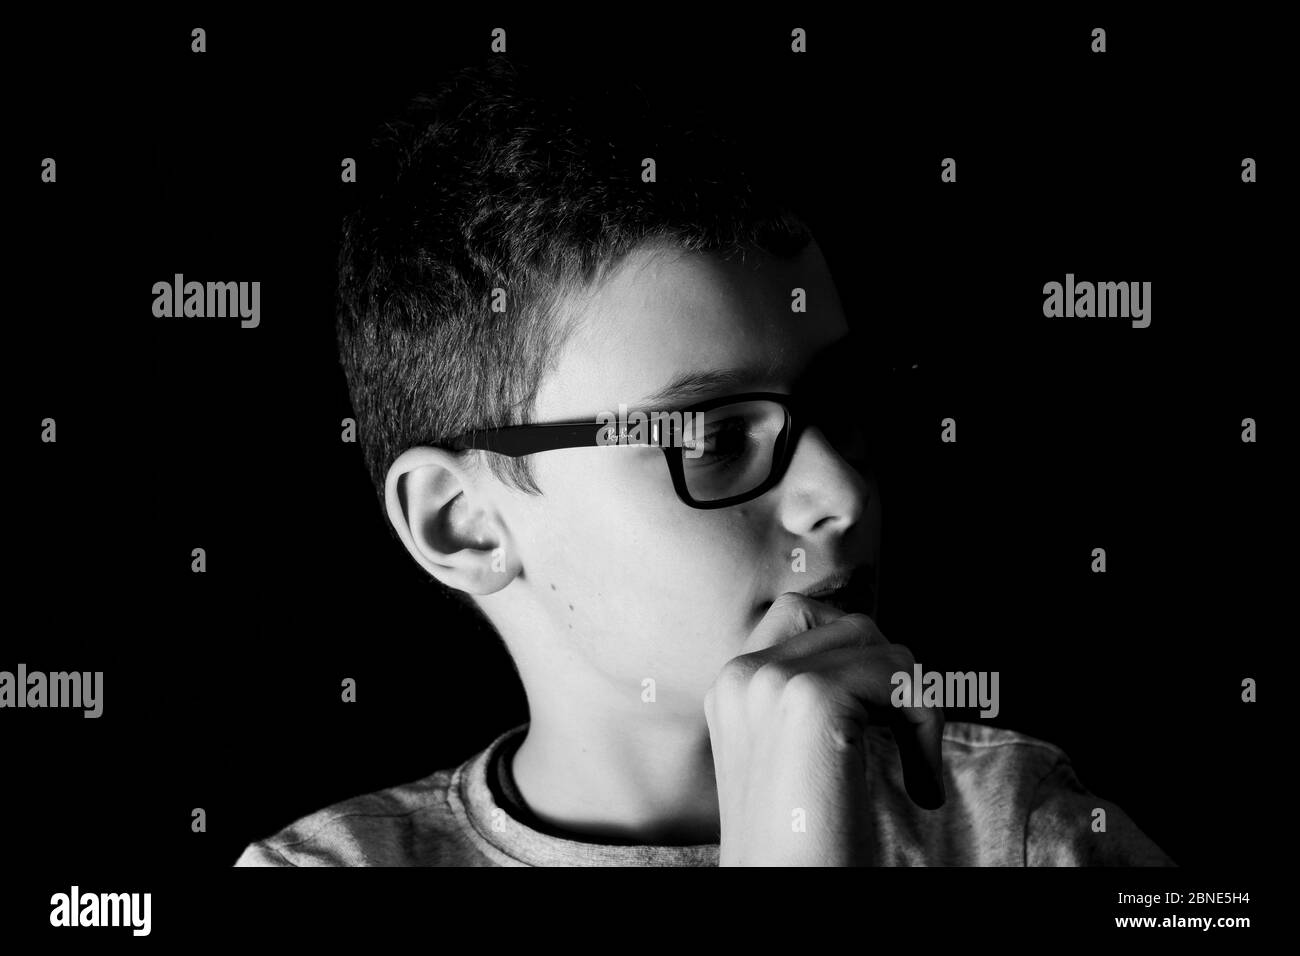 Boy with glasses looks thoughtfully in portrait Stock Photo